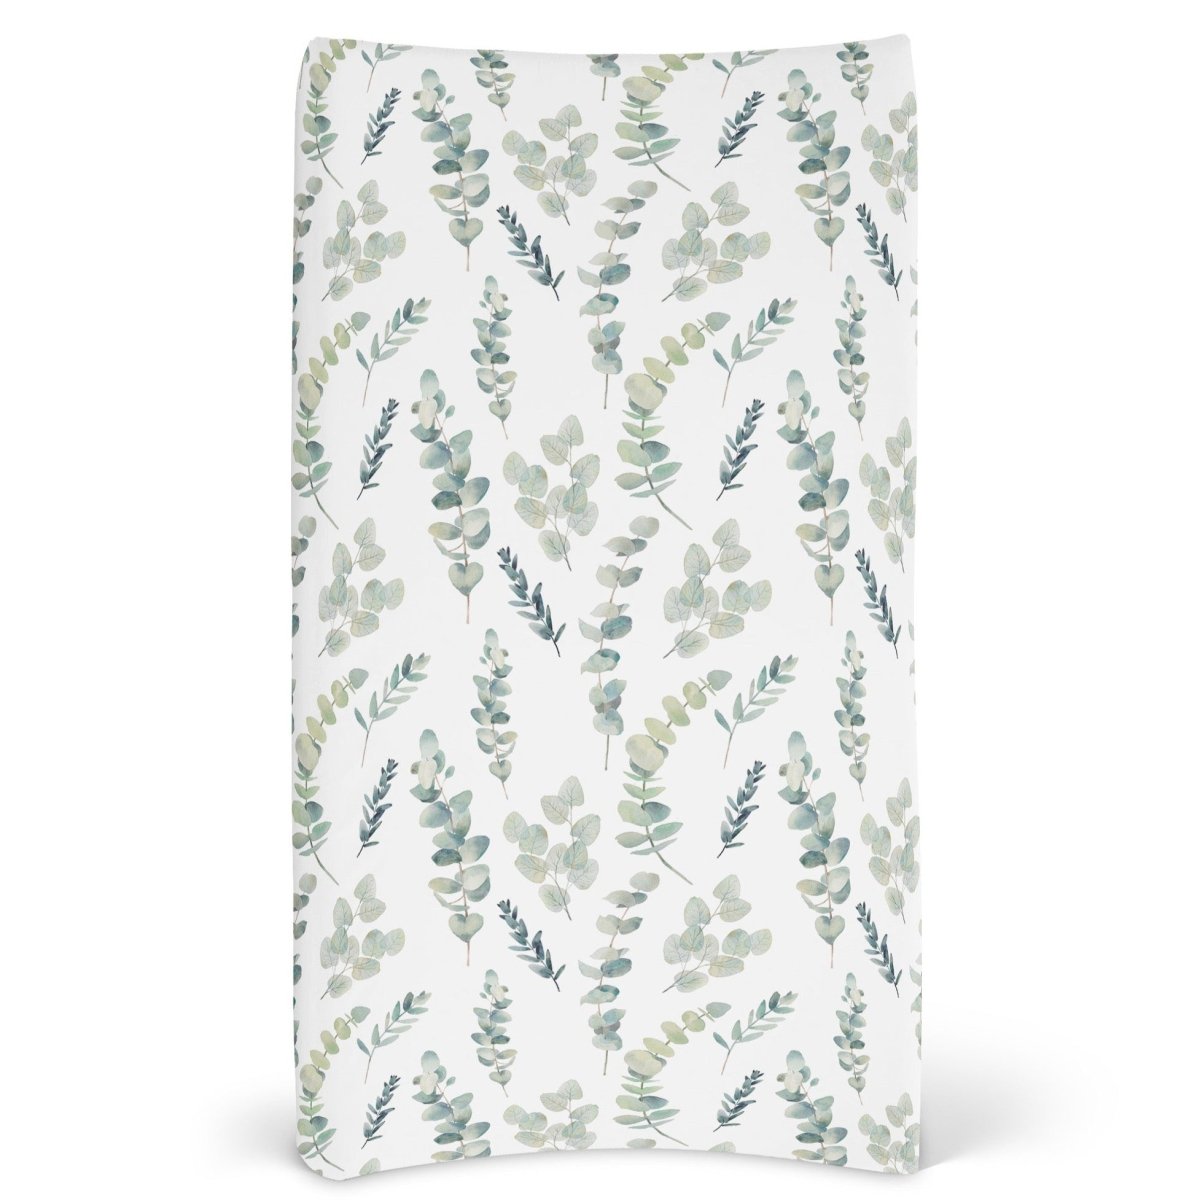 Going Green Changing Pad Cover